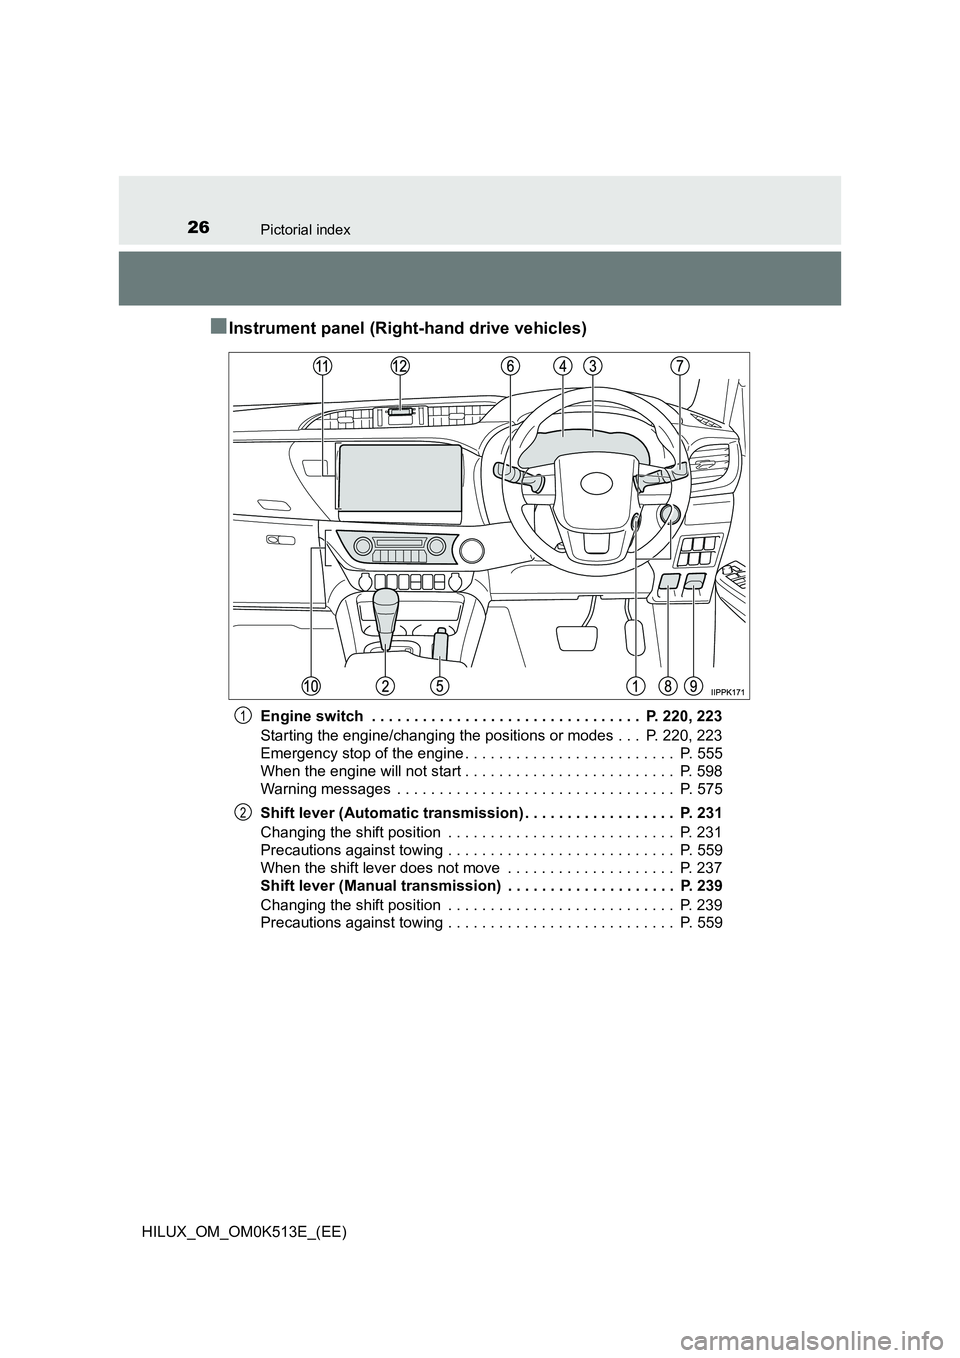 TOYOTA HILUX 2021  Owners Manual (in English) 26Pictorial index
HILUX_OM_OM0K513E_(EE)
�QInstrument panel (Right-hand drive vehicles)
Engine switch  . . . . . . . . . . . . . . . . . . . . . . . . . . . . . . . .  P. 220, 223 
Starting the engine